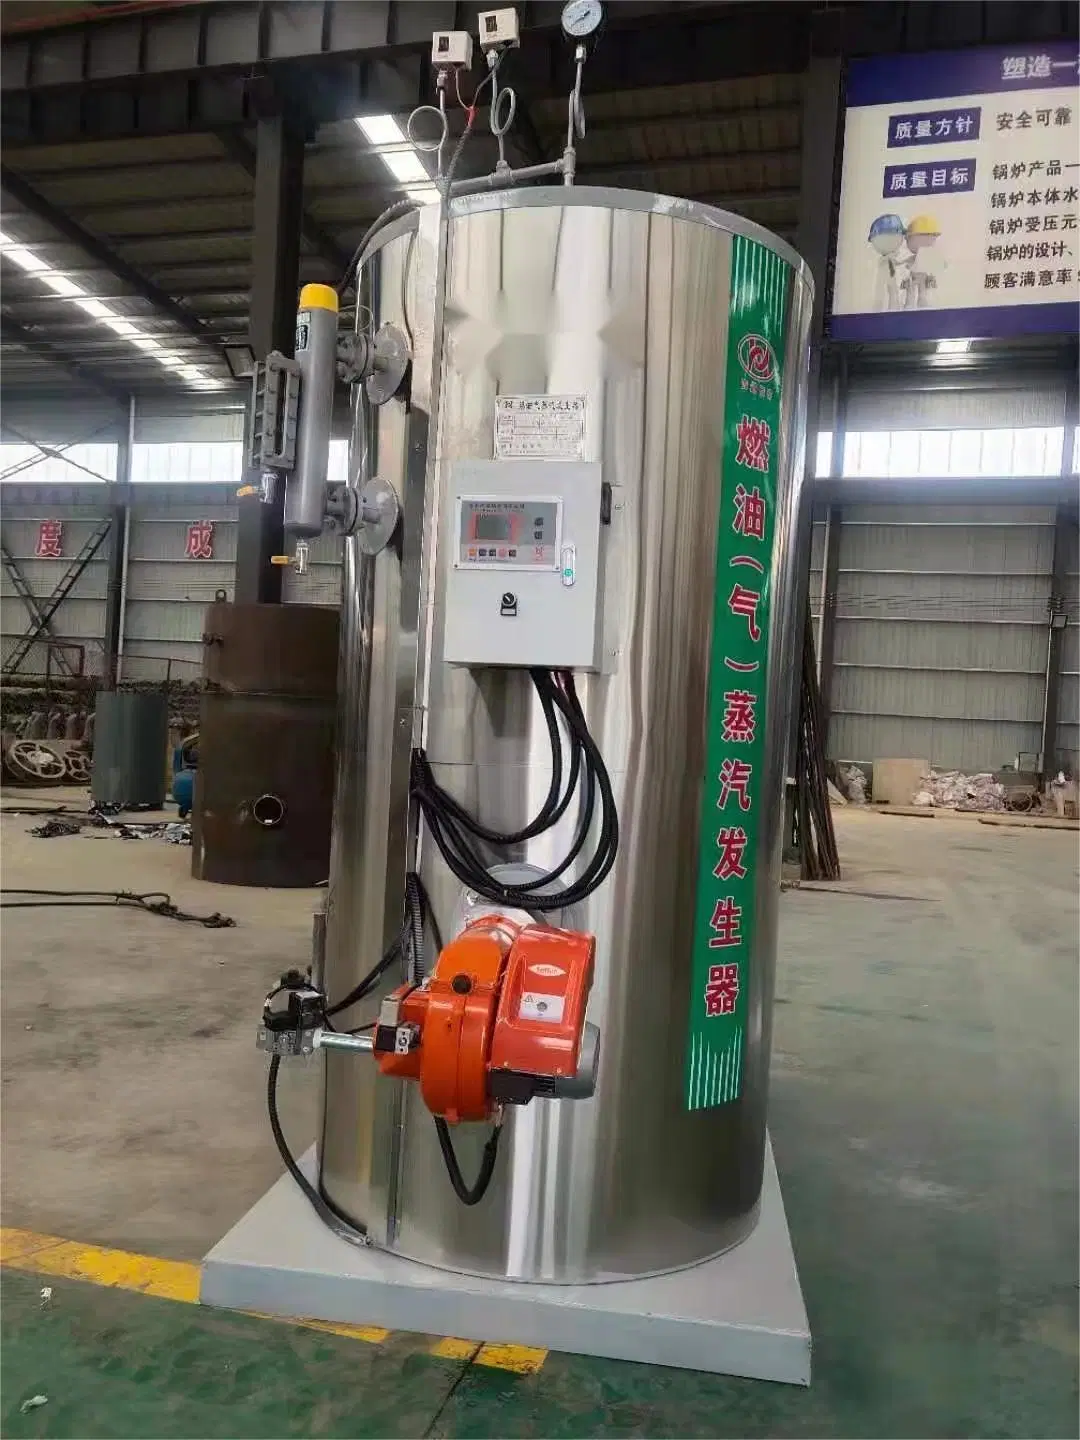 China Factory Supply Low Energy Consumption Lss Industry Plant Gas Powered Oil/Gas Fired Steam Generator Steam Boiler for SPA